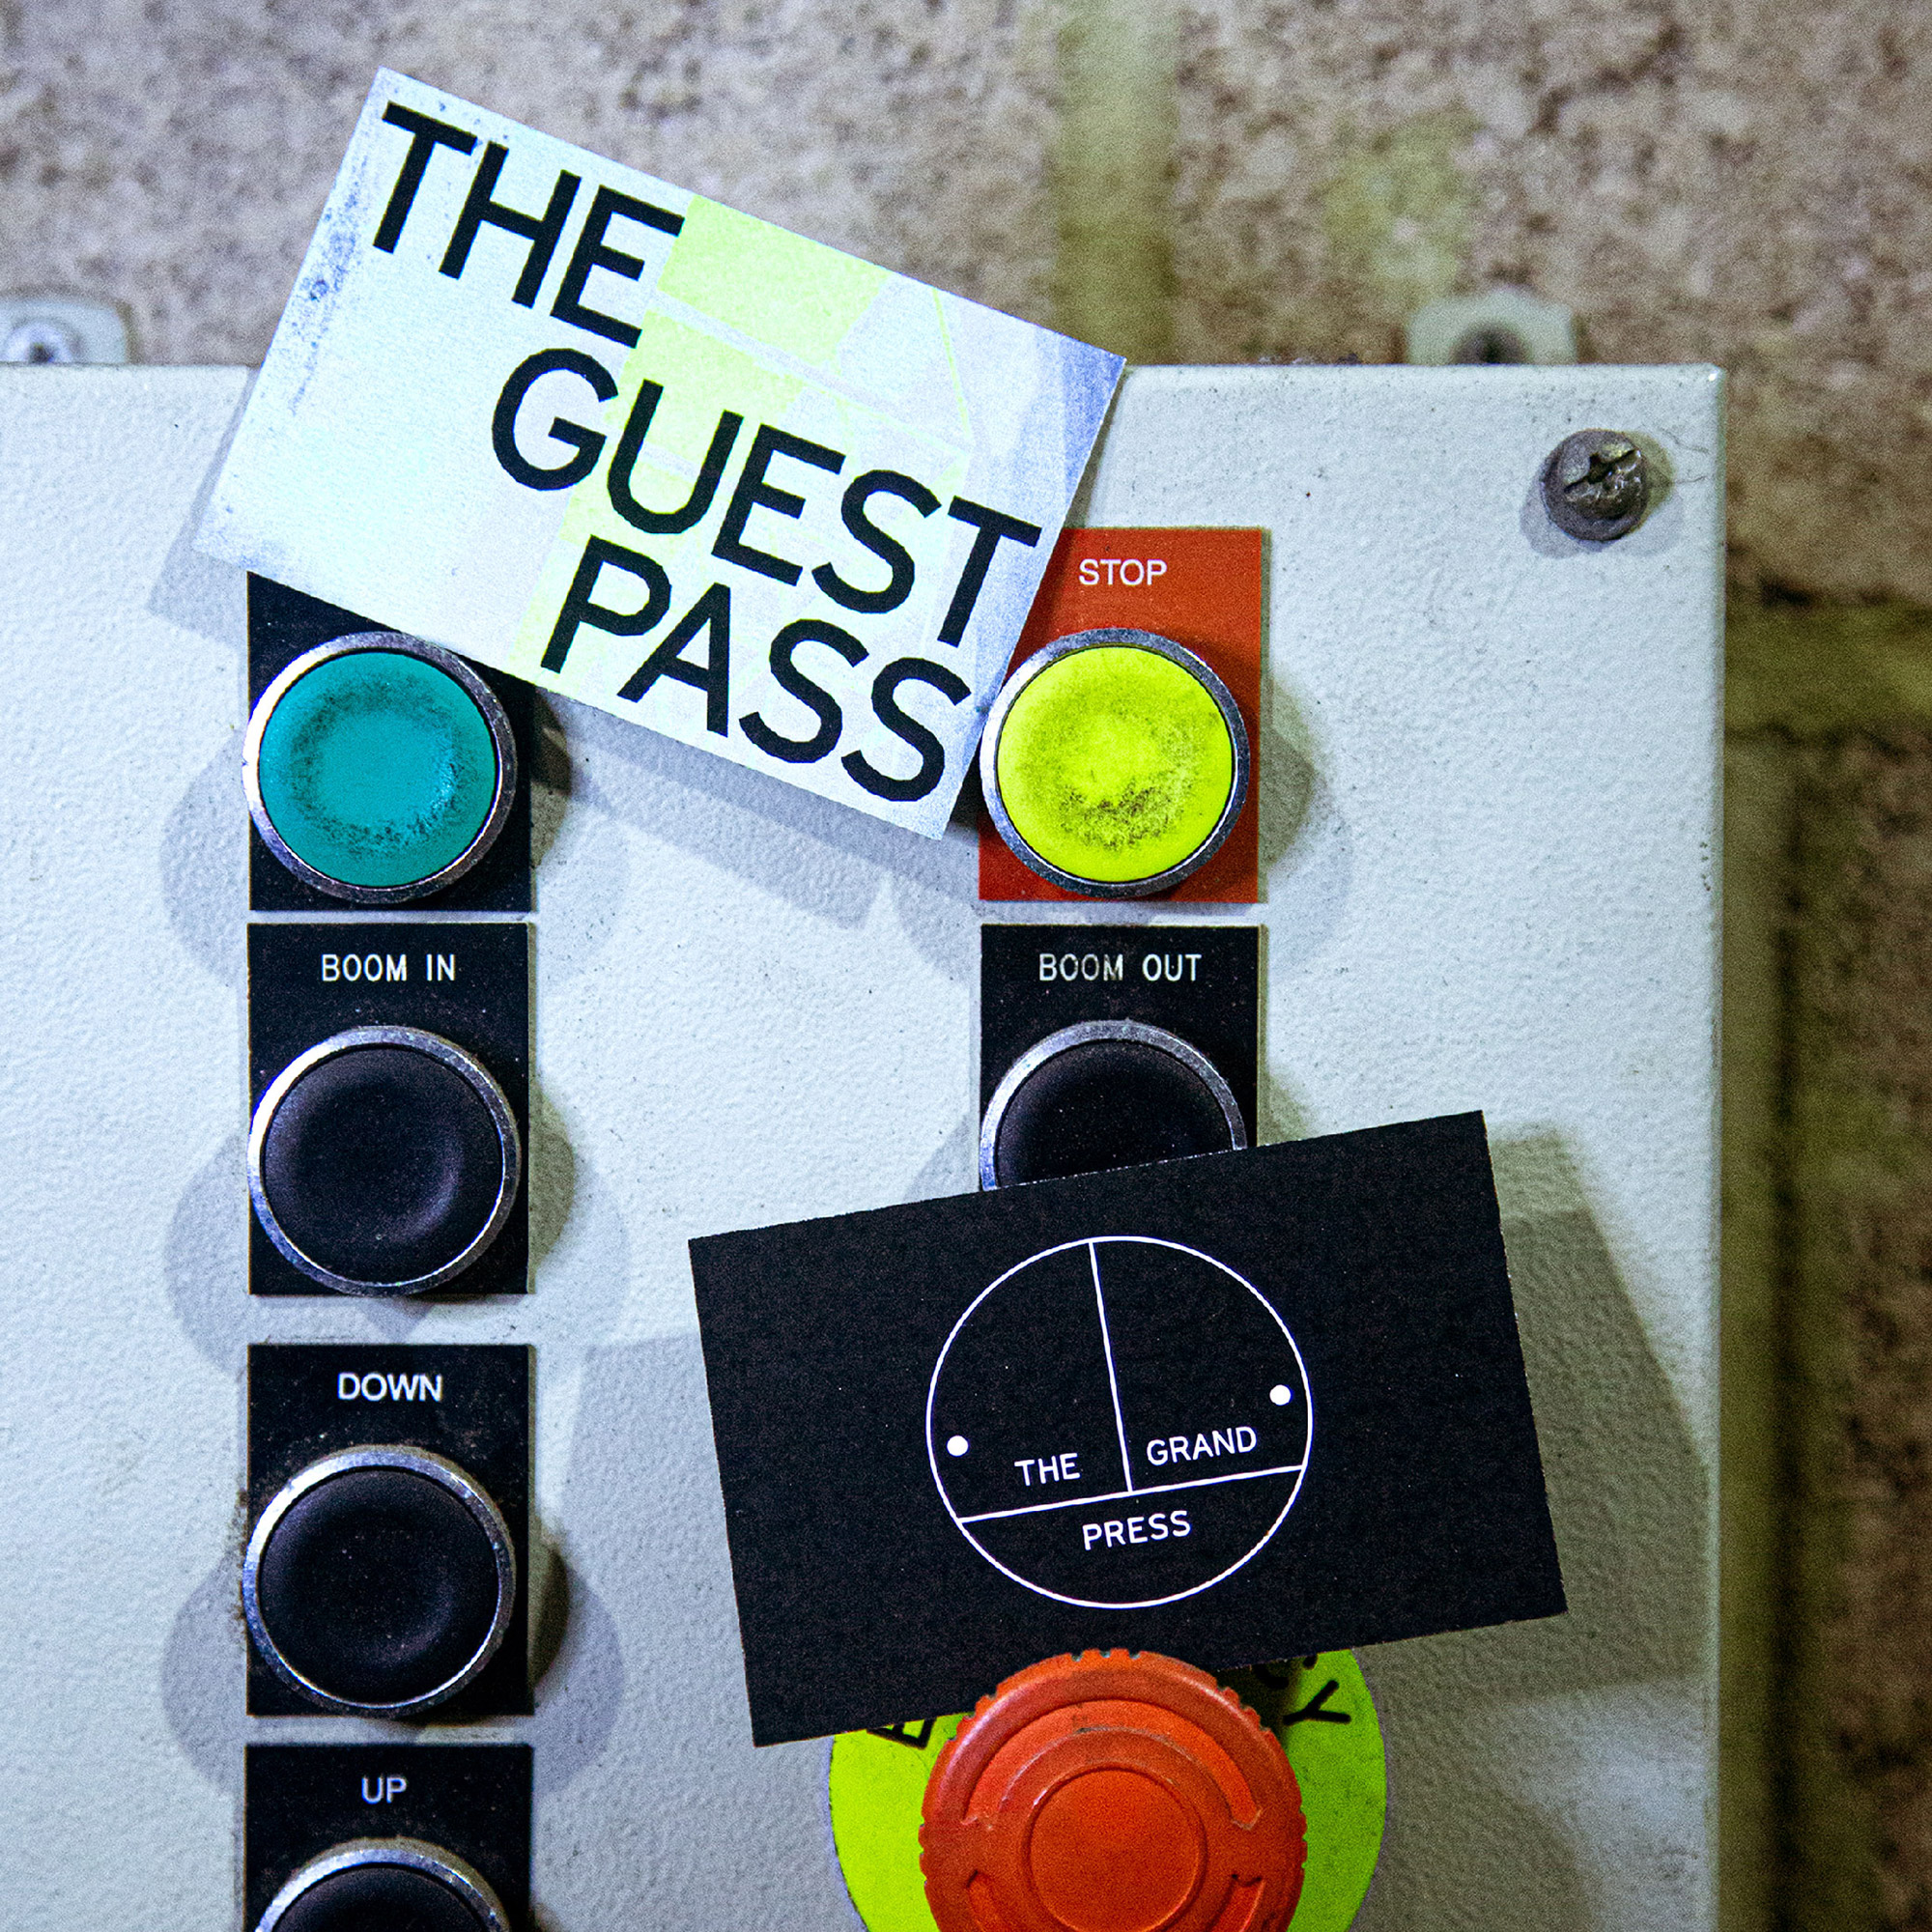 The Grand Press guest pass